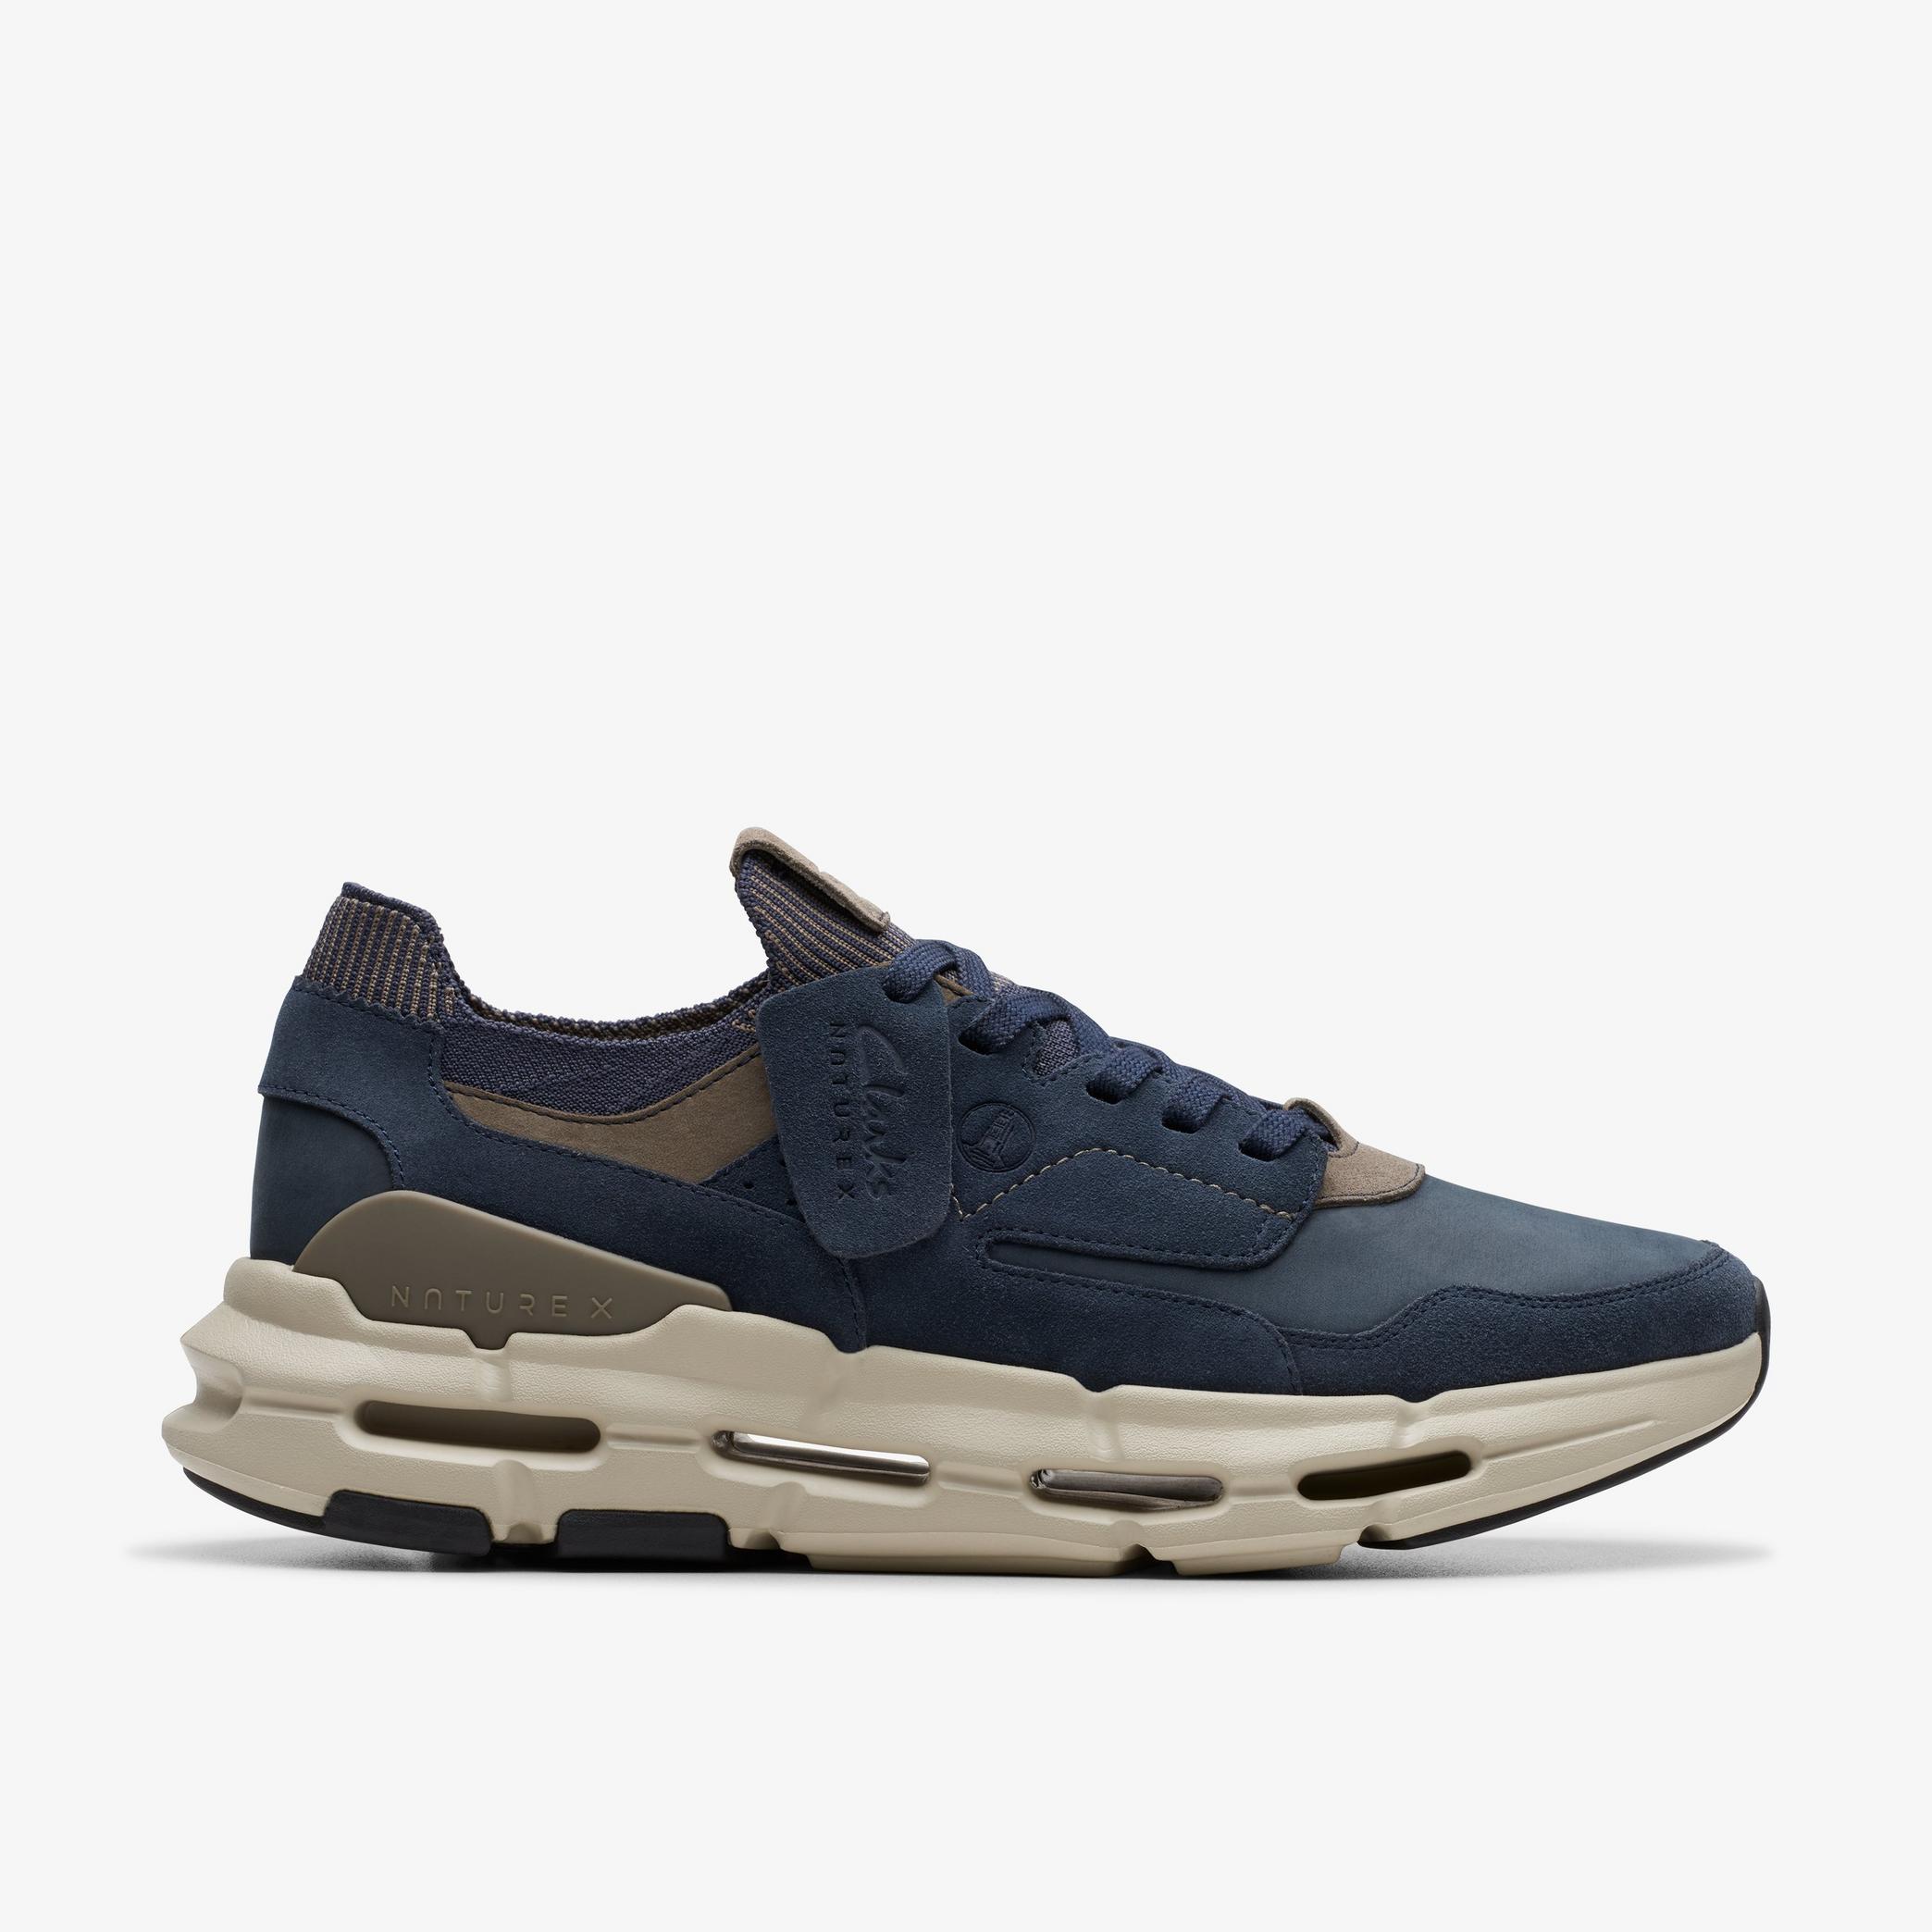 NXE Lo Navy Nubuck Shoes, view 1 of 7